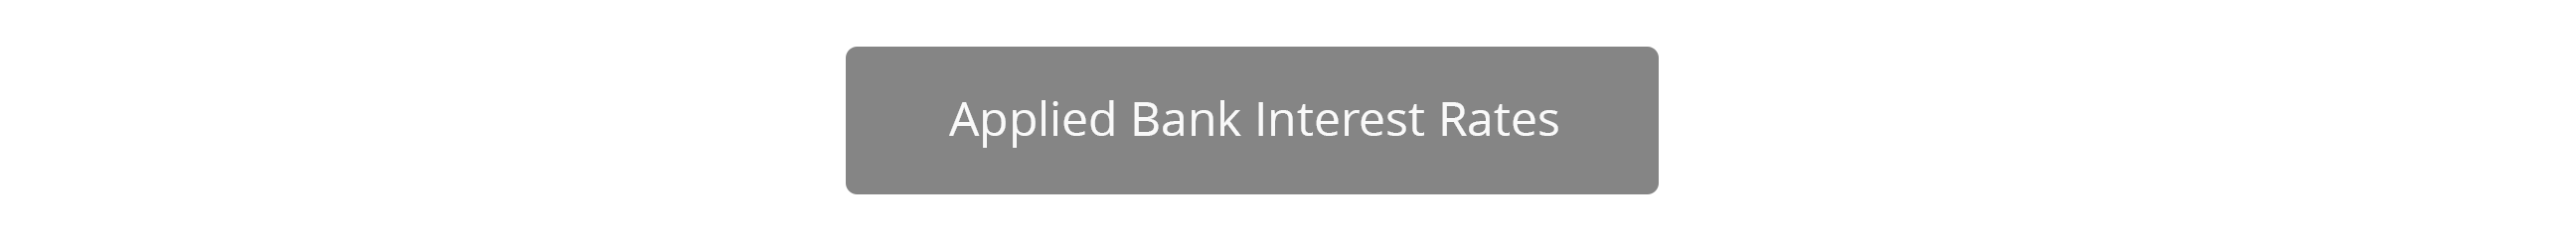 Applied Bank Interest Rates